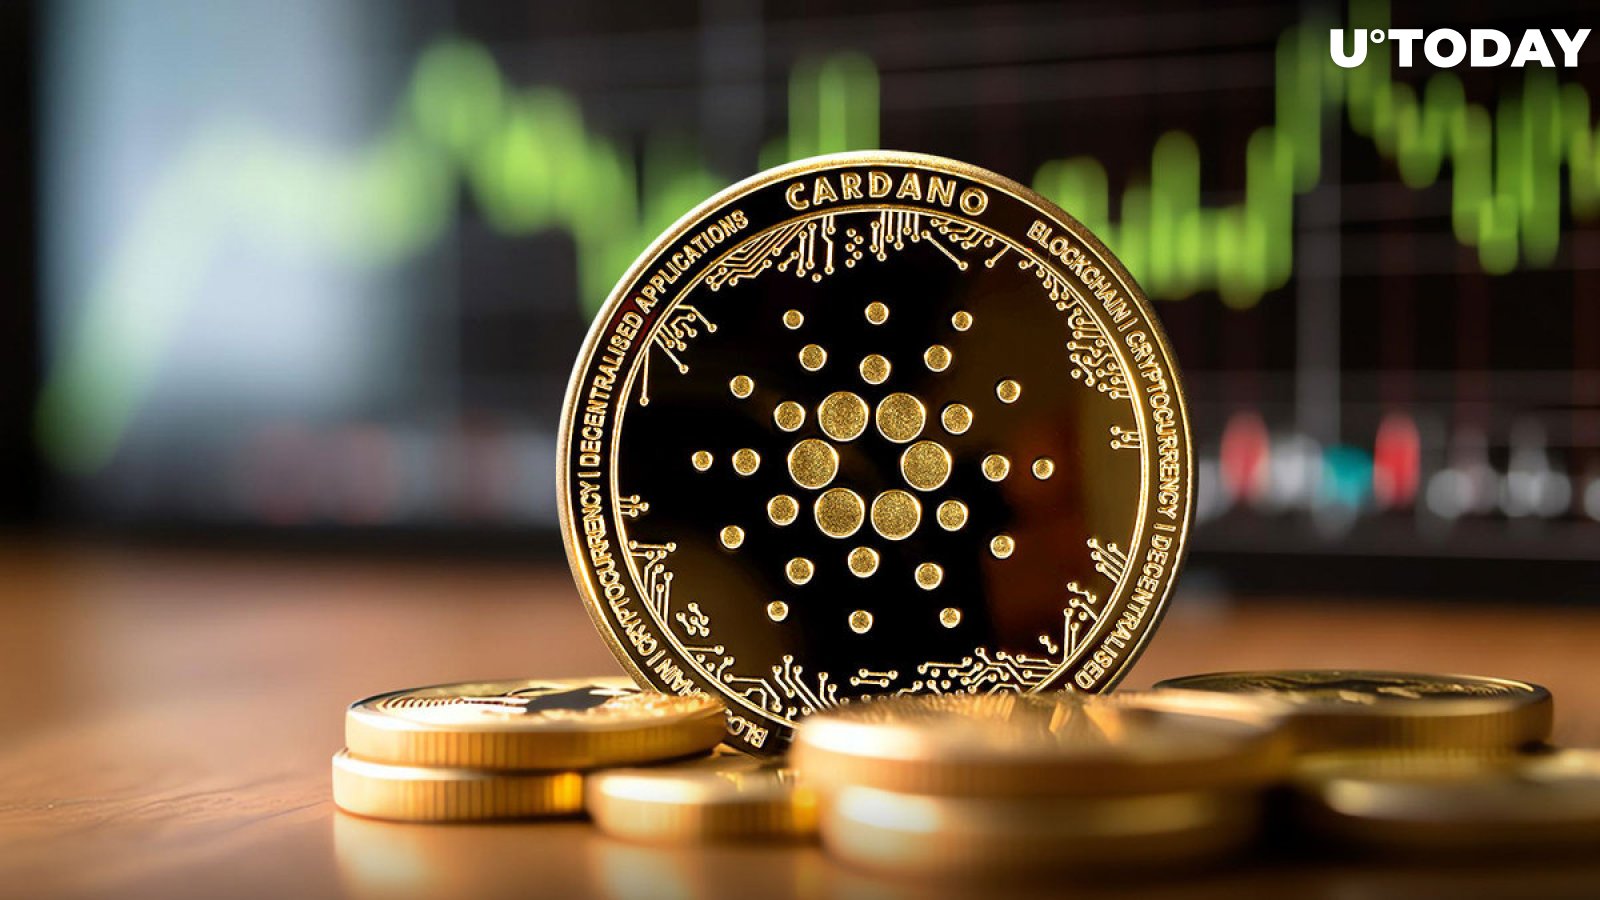 Cardano to Reach $1.7 in 300% ADA Price Rally, Analyst Predicts